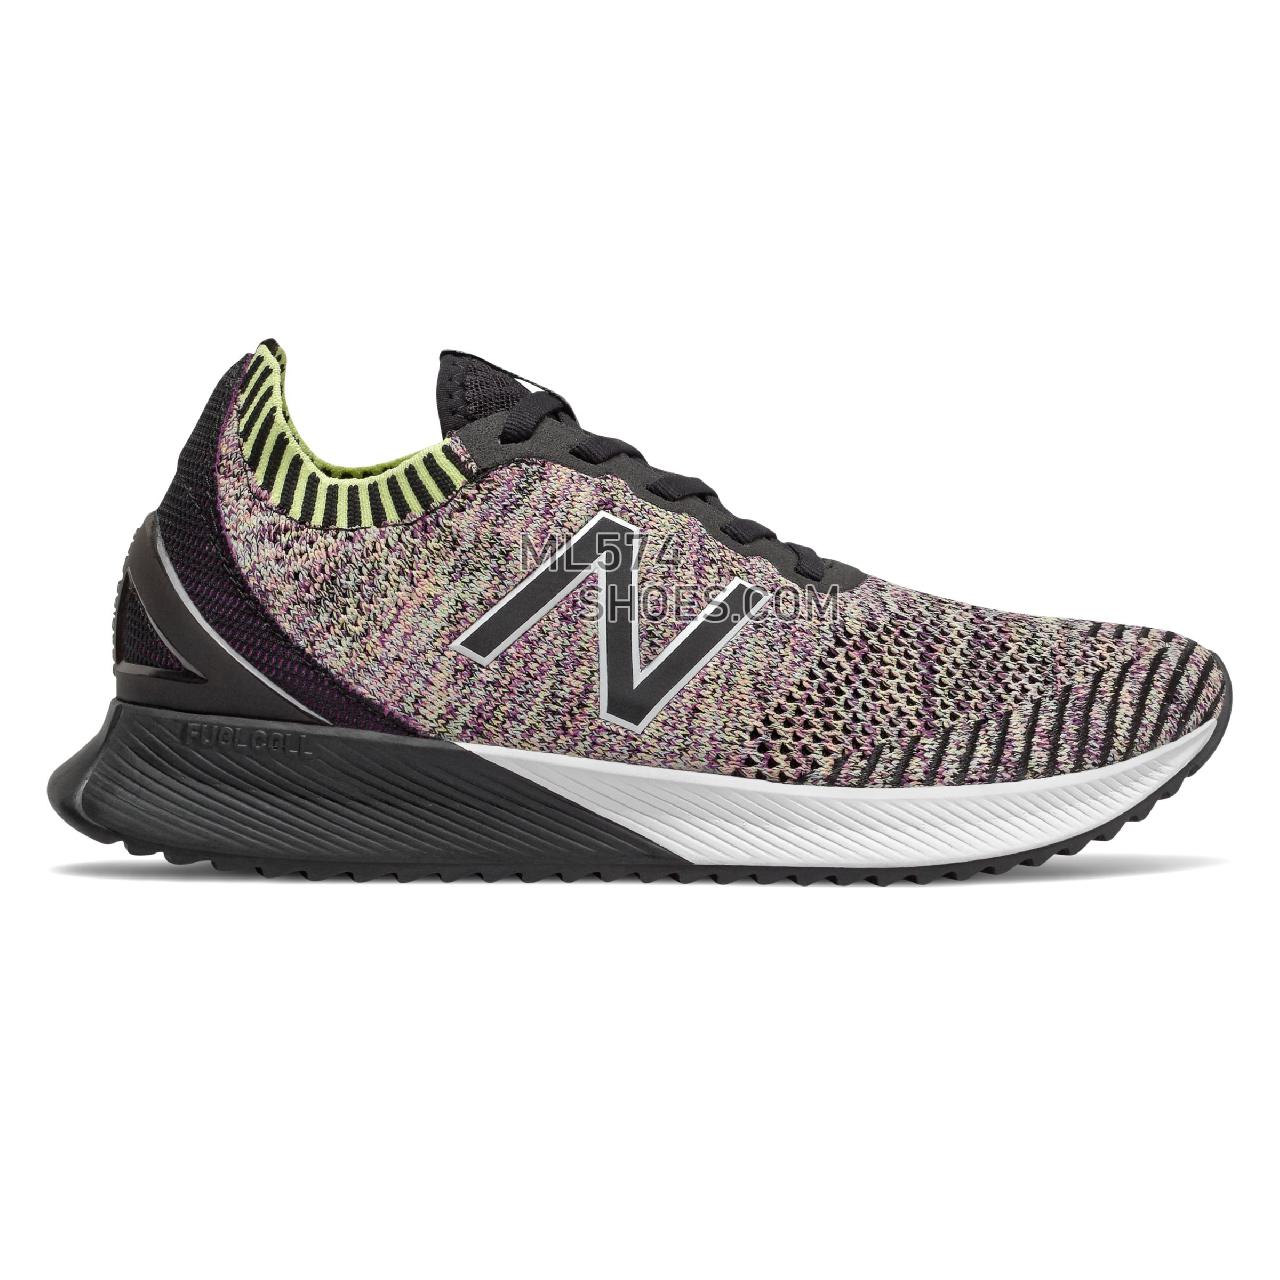 New Balance FuelCell Echo - Women's Neutral Running - Plum with Bali Blue and Ginger Pink - WFCECCM